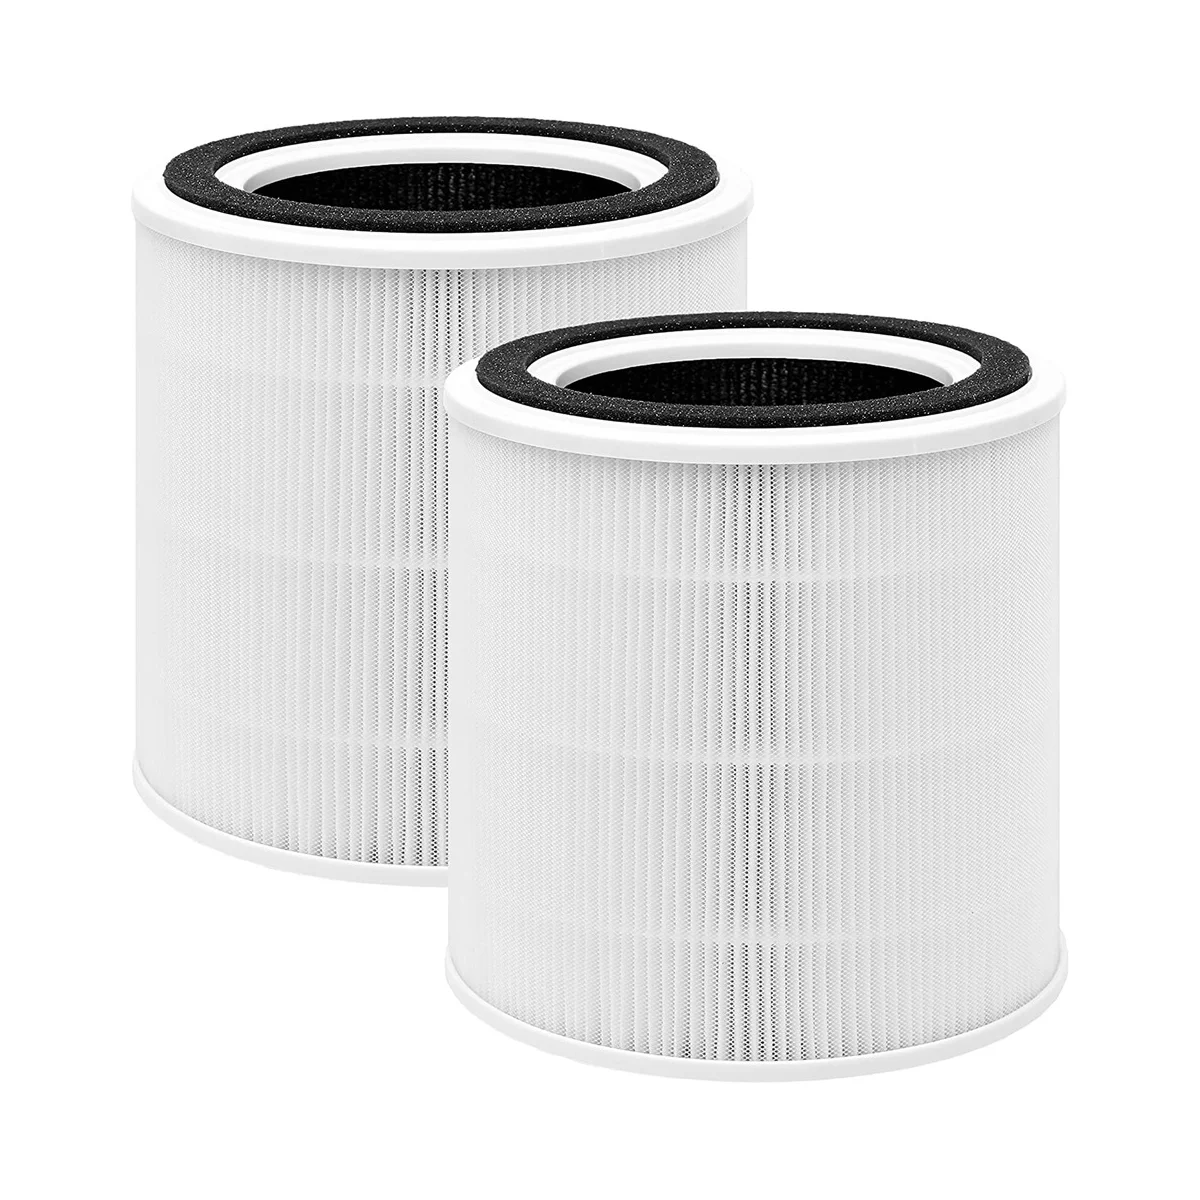 

AP005 Replacement Filters for TaoTronics TT-AP005 Air Purifier, True HEPA and Activated Carbon Filter Set